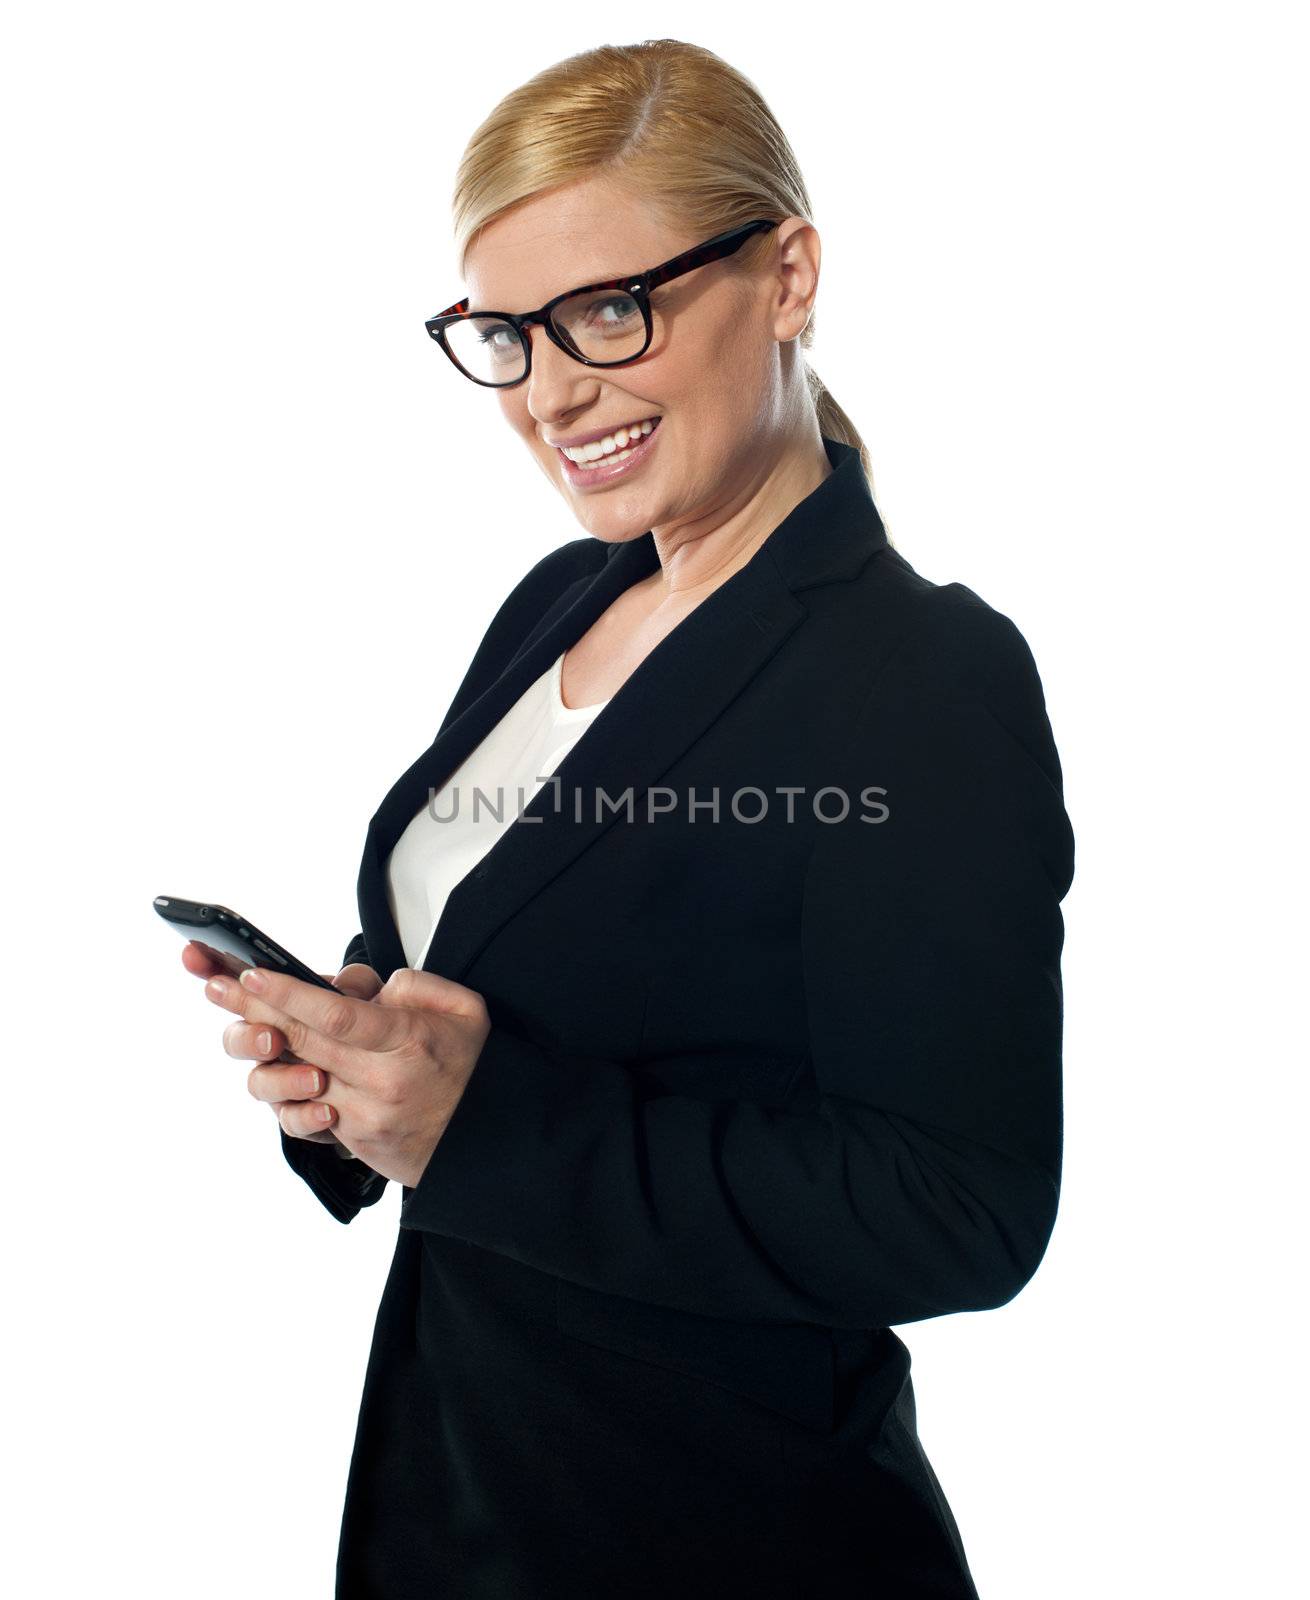 Female business executive texting on phone in front of camera